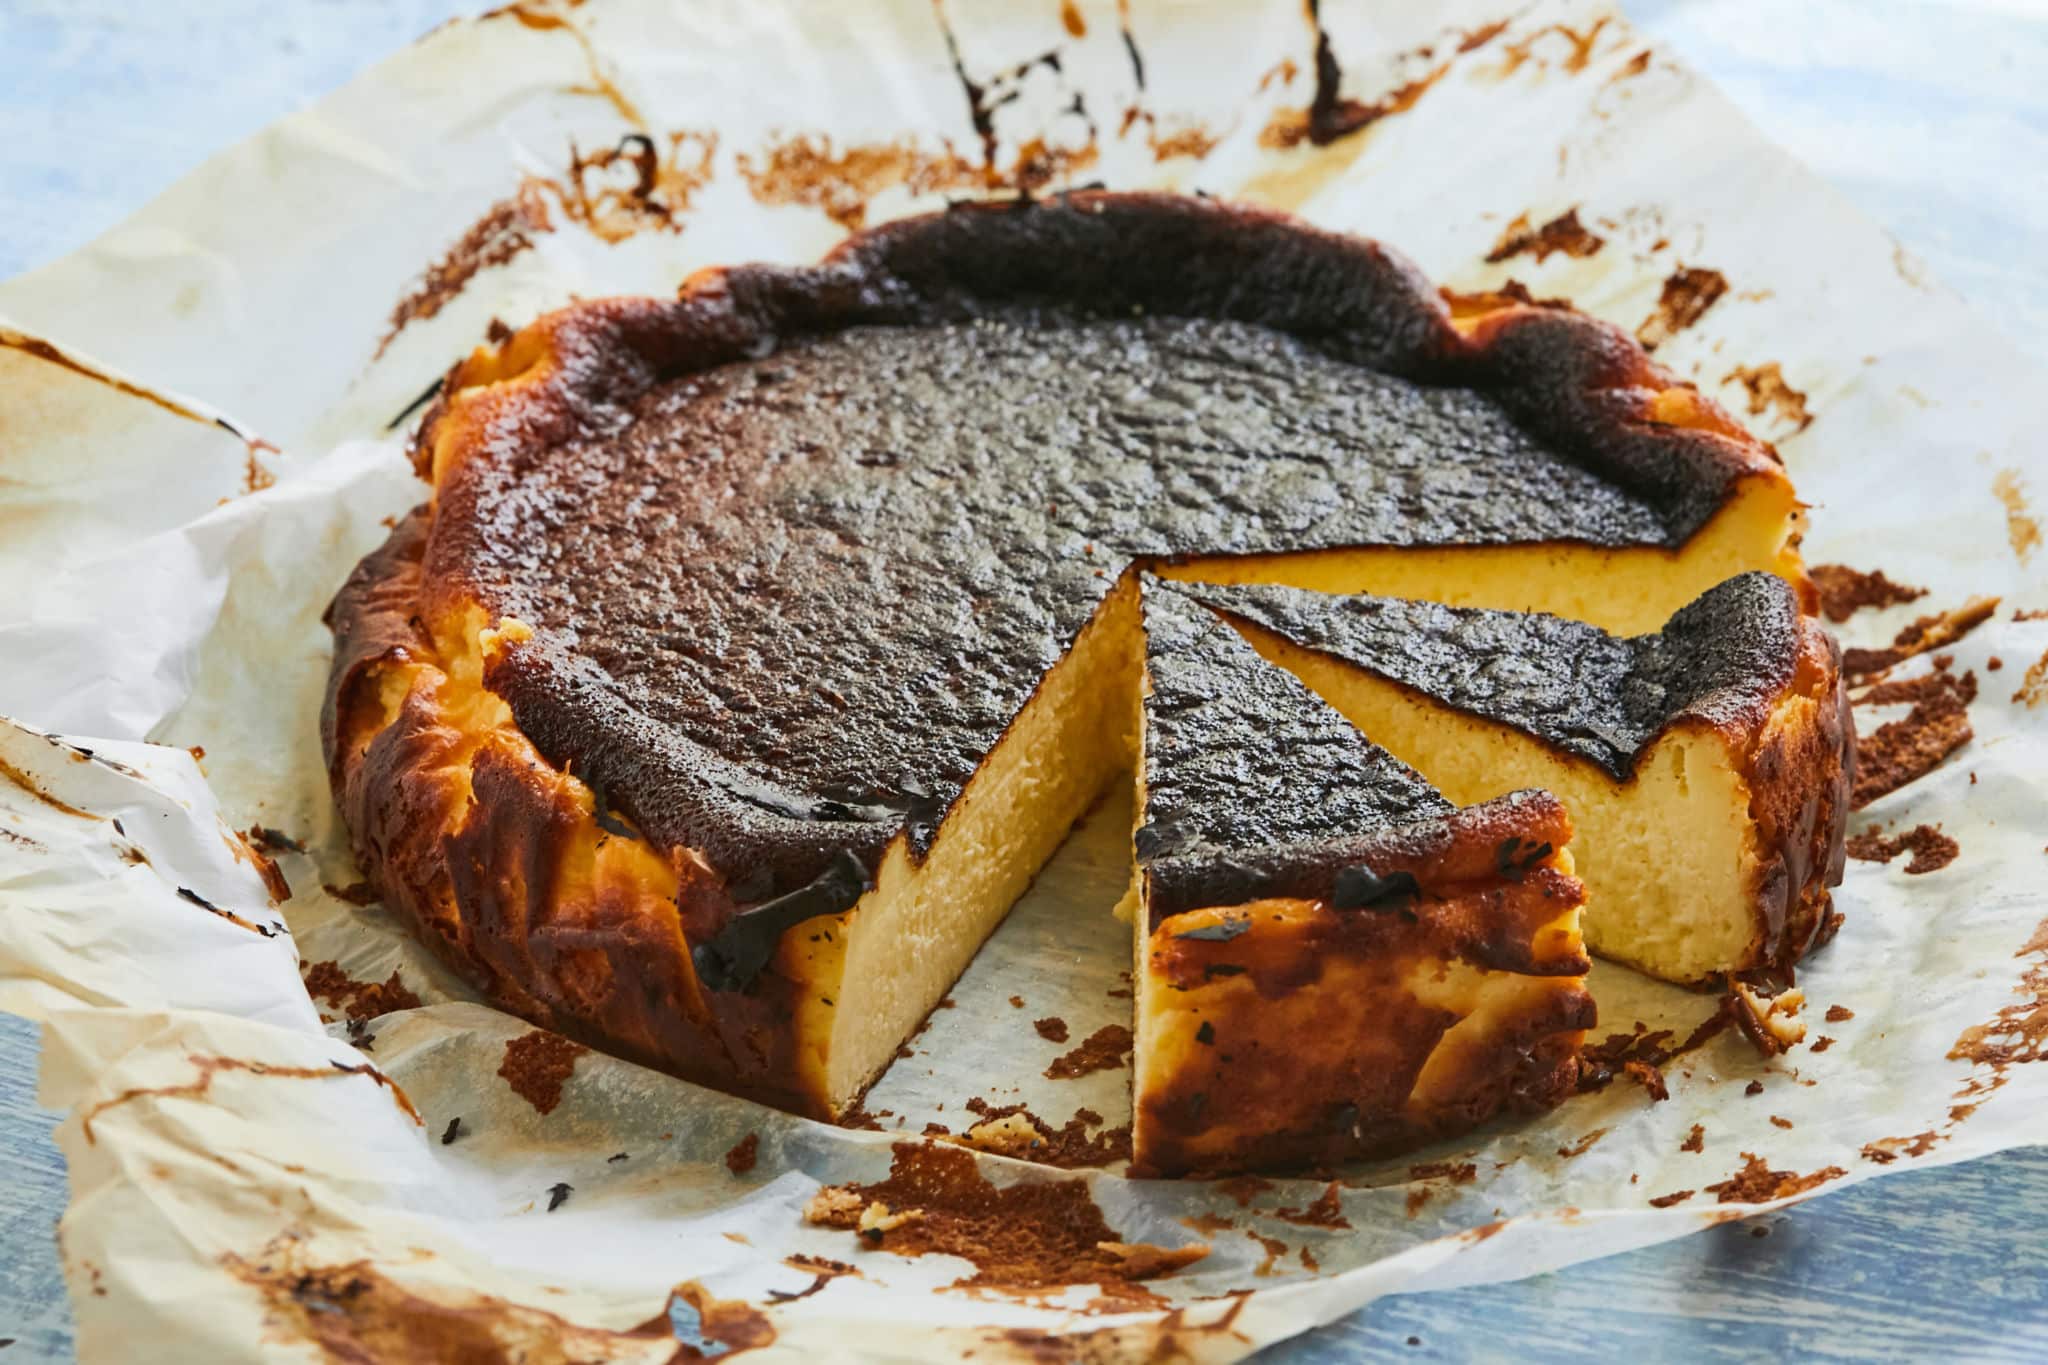 A burnt basque cheesecake with two slices.